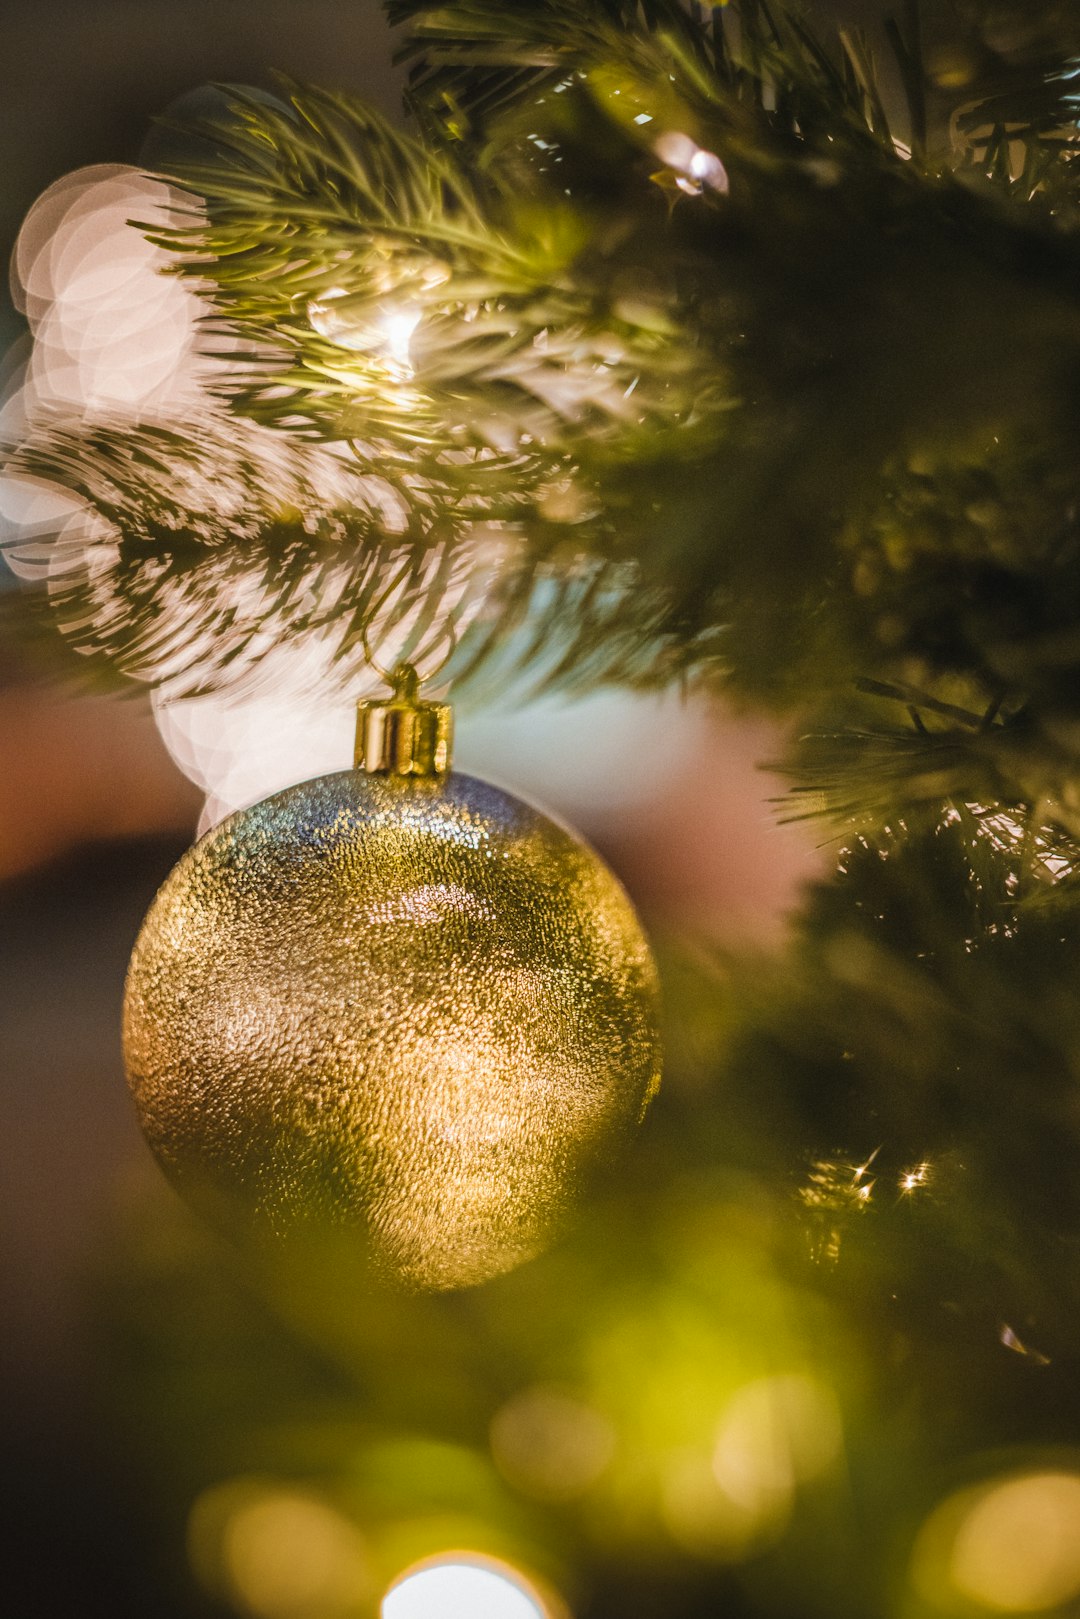 gold bauble on green christmas tree